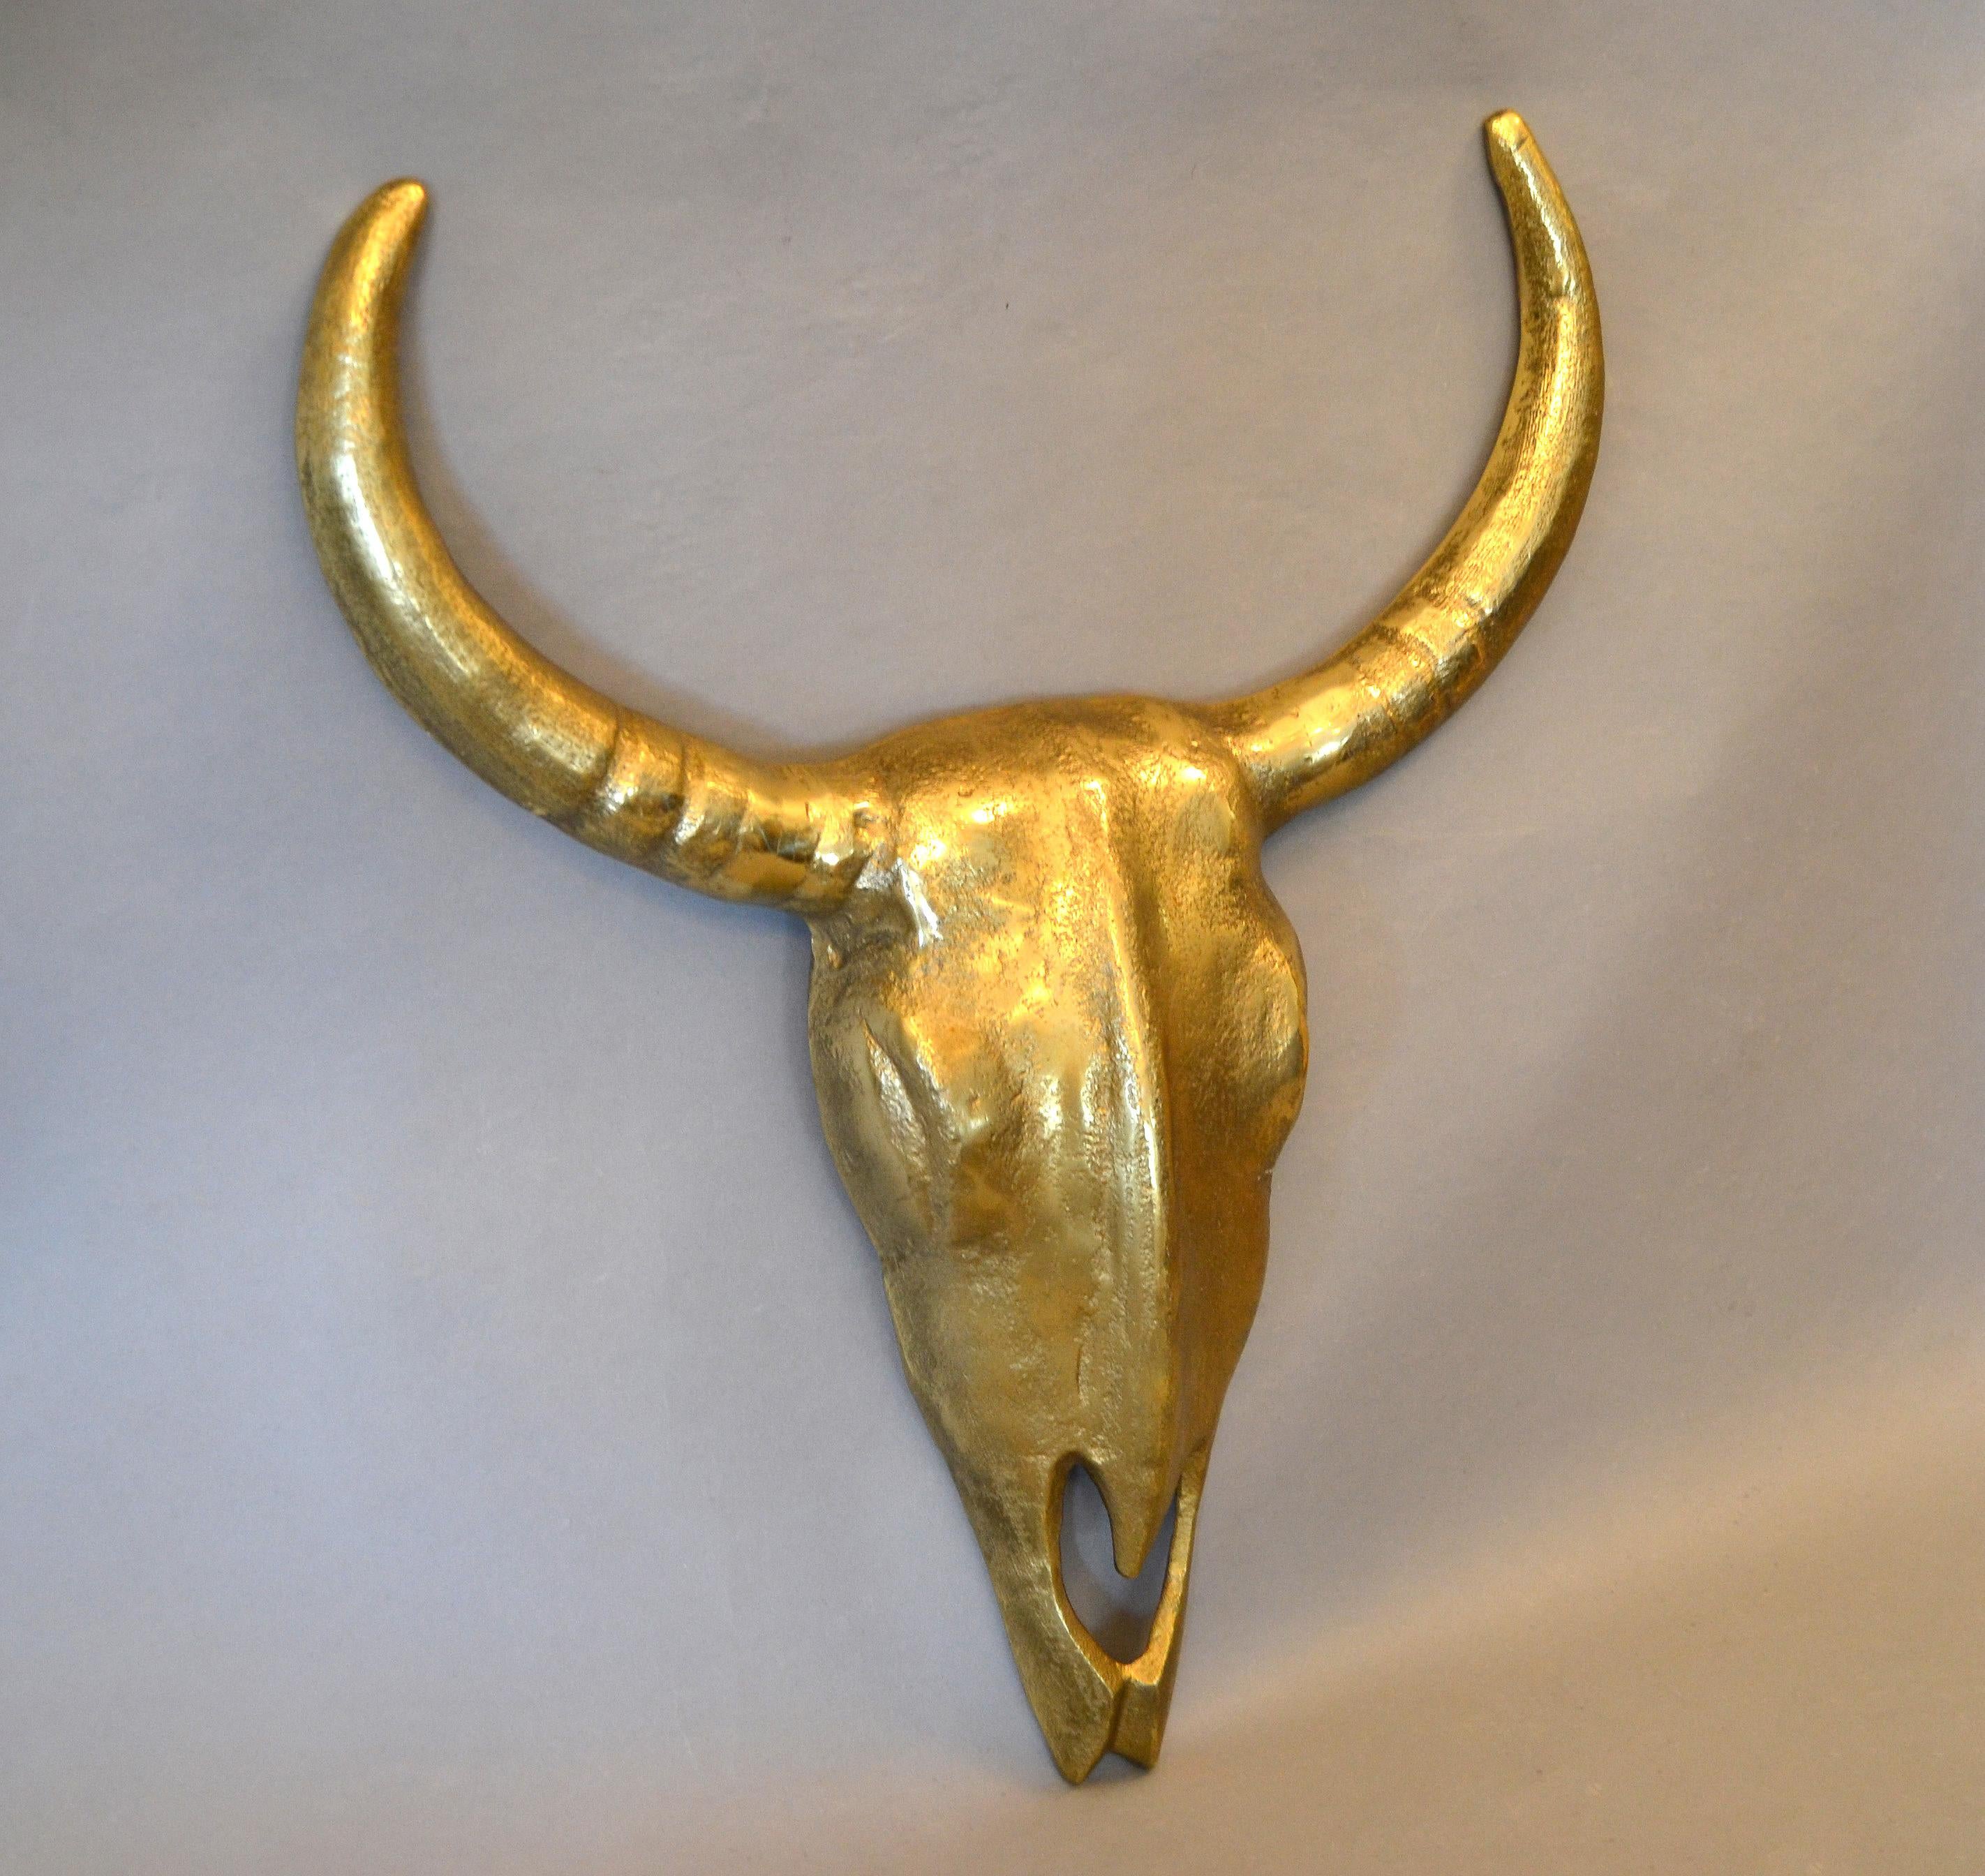 Modern cast bronze steer head skull wall-mounted sculpture, decorative Fine Art or wall hanging.
The Fine Art sculpture has on the reverse a hook for mounting it on the wall.

  